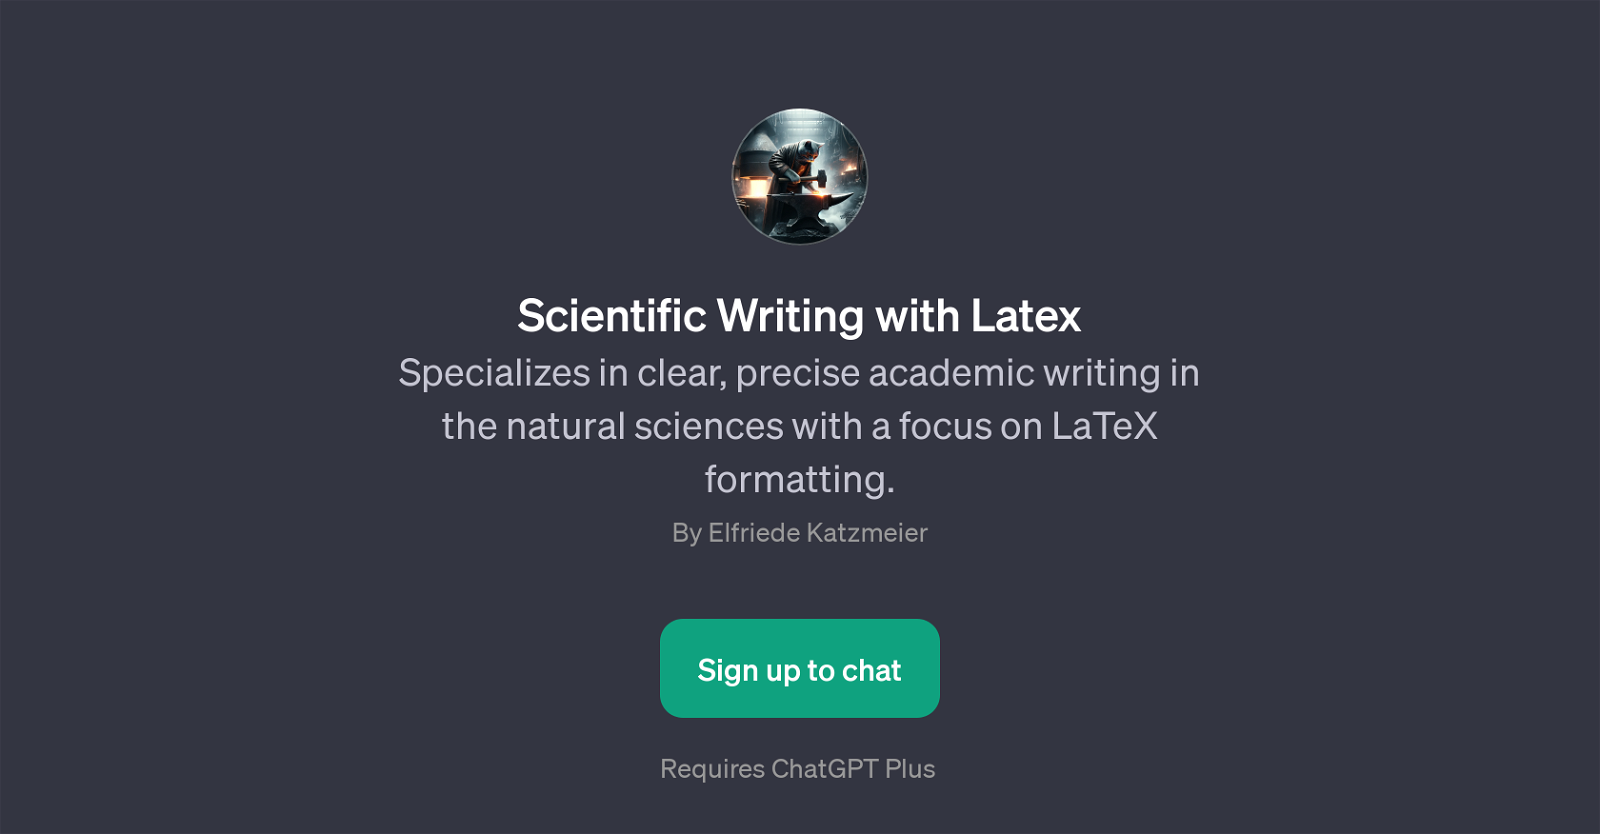 Scientific Writing with Latex website